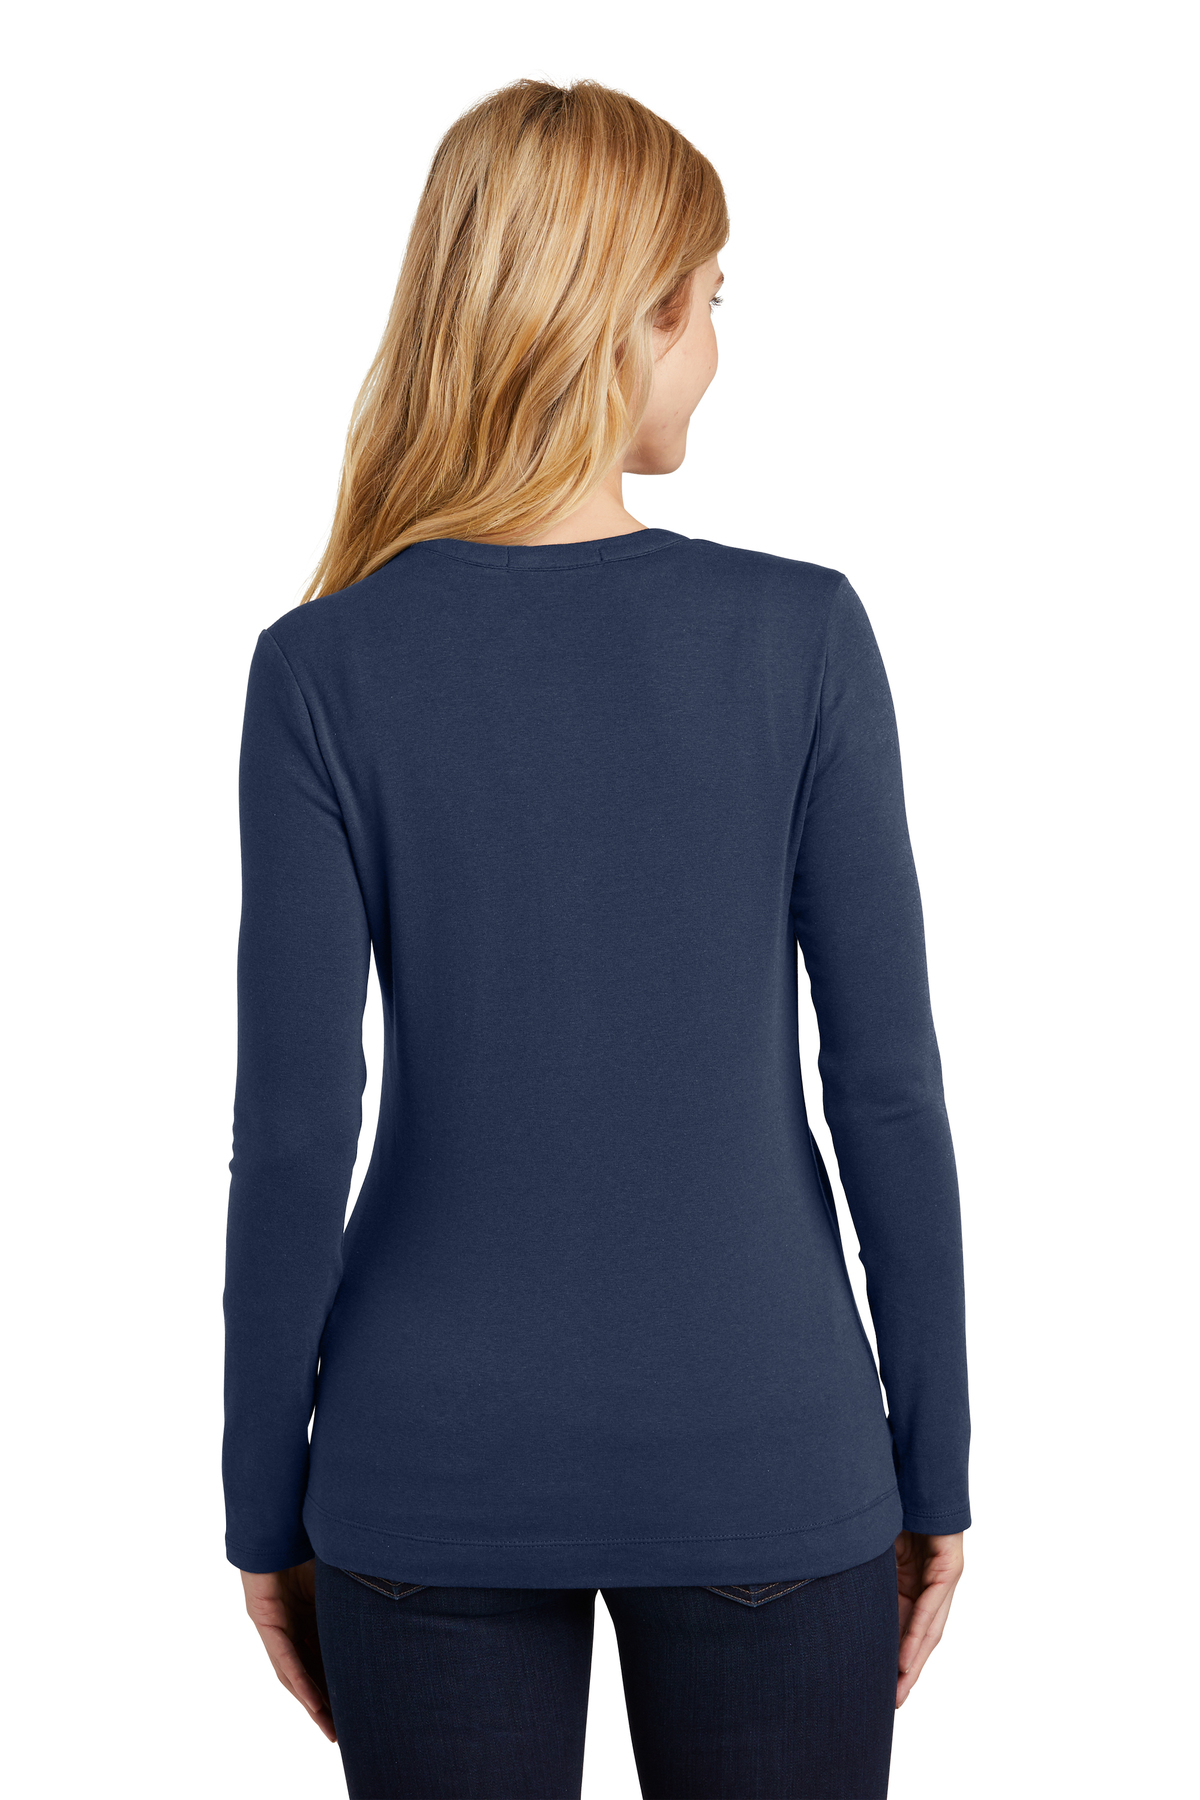 Stretch Authority Port | Ladies | Cardigan Port Concept Authority Button-Front Product